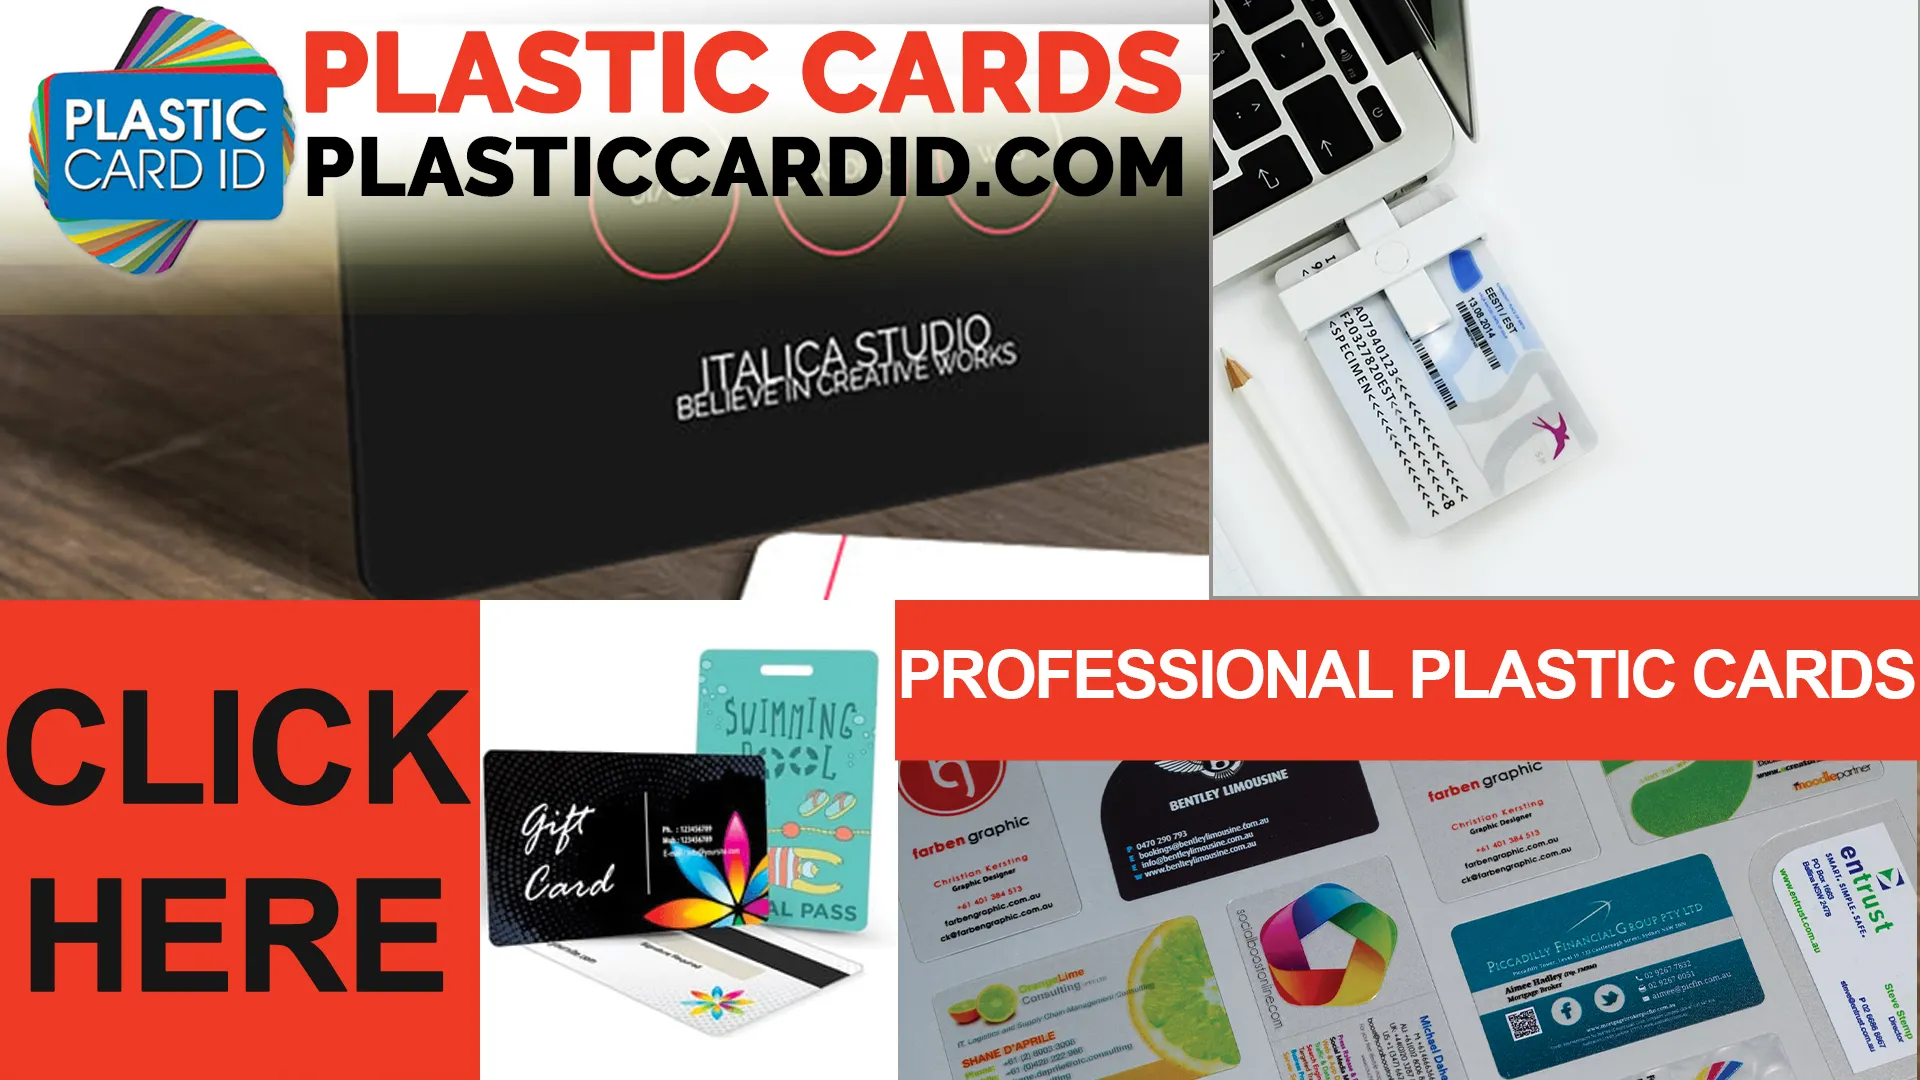 Navigate Through Our Plastic Card FAQs with Ease